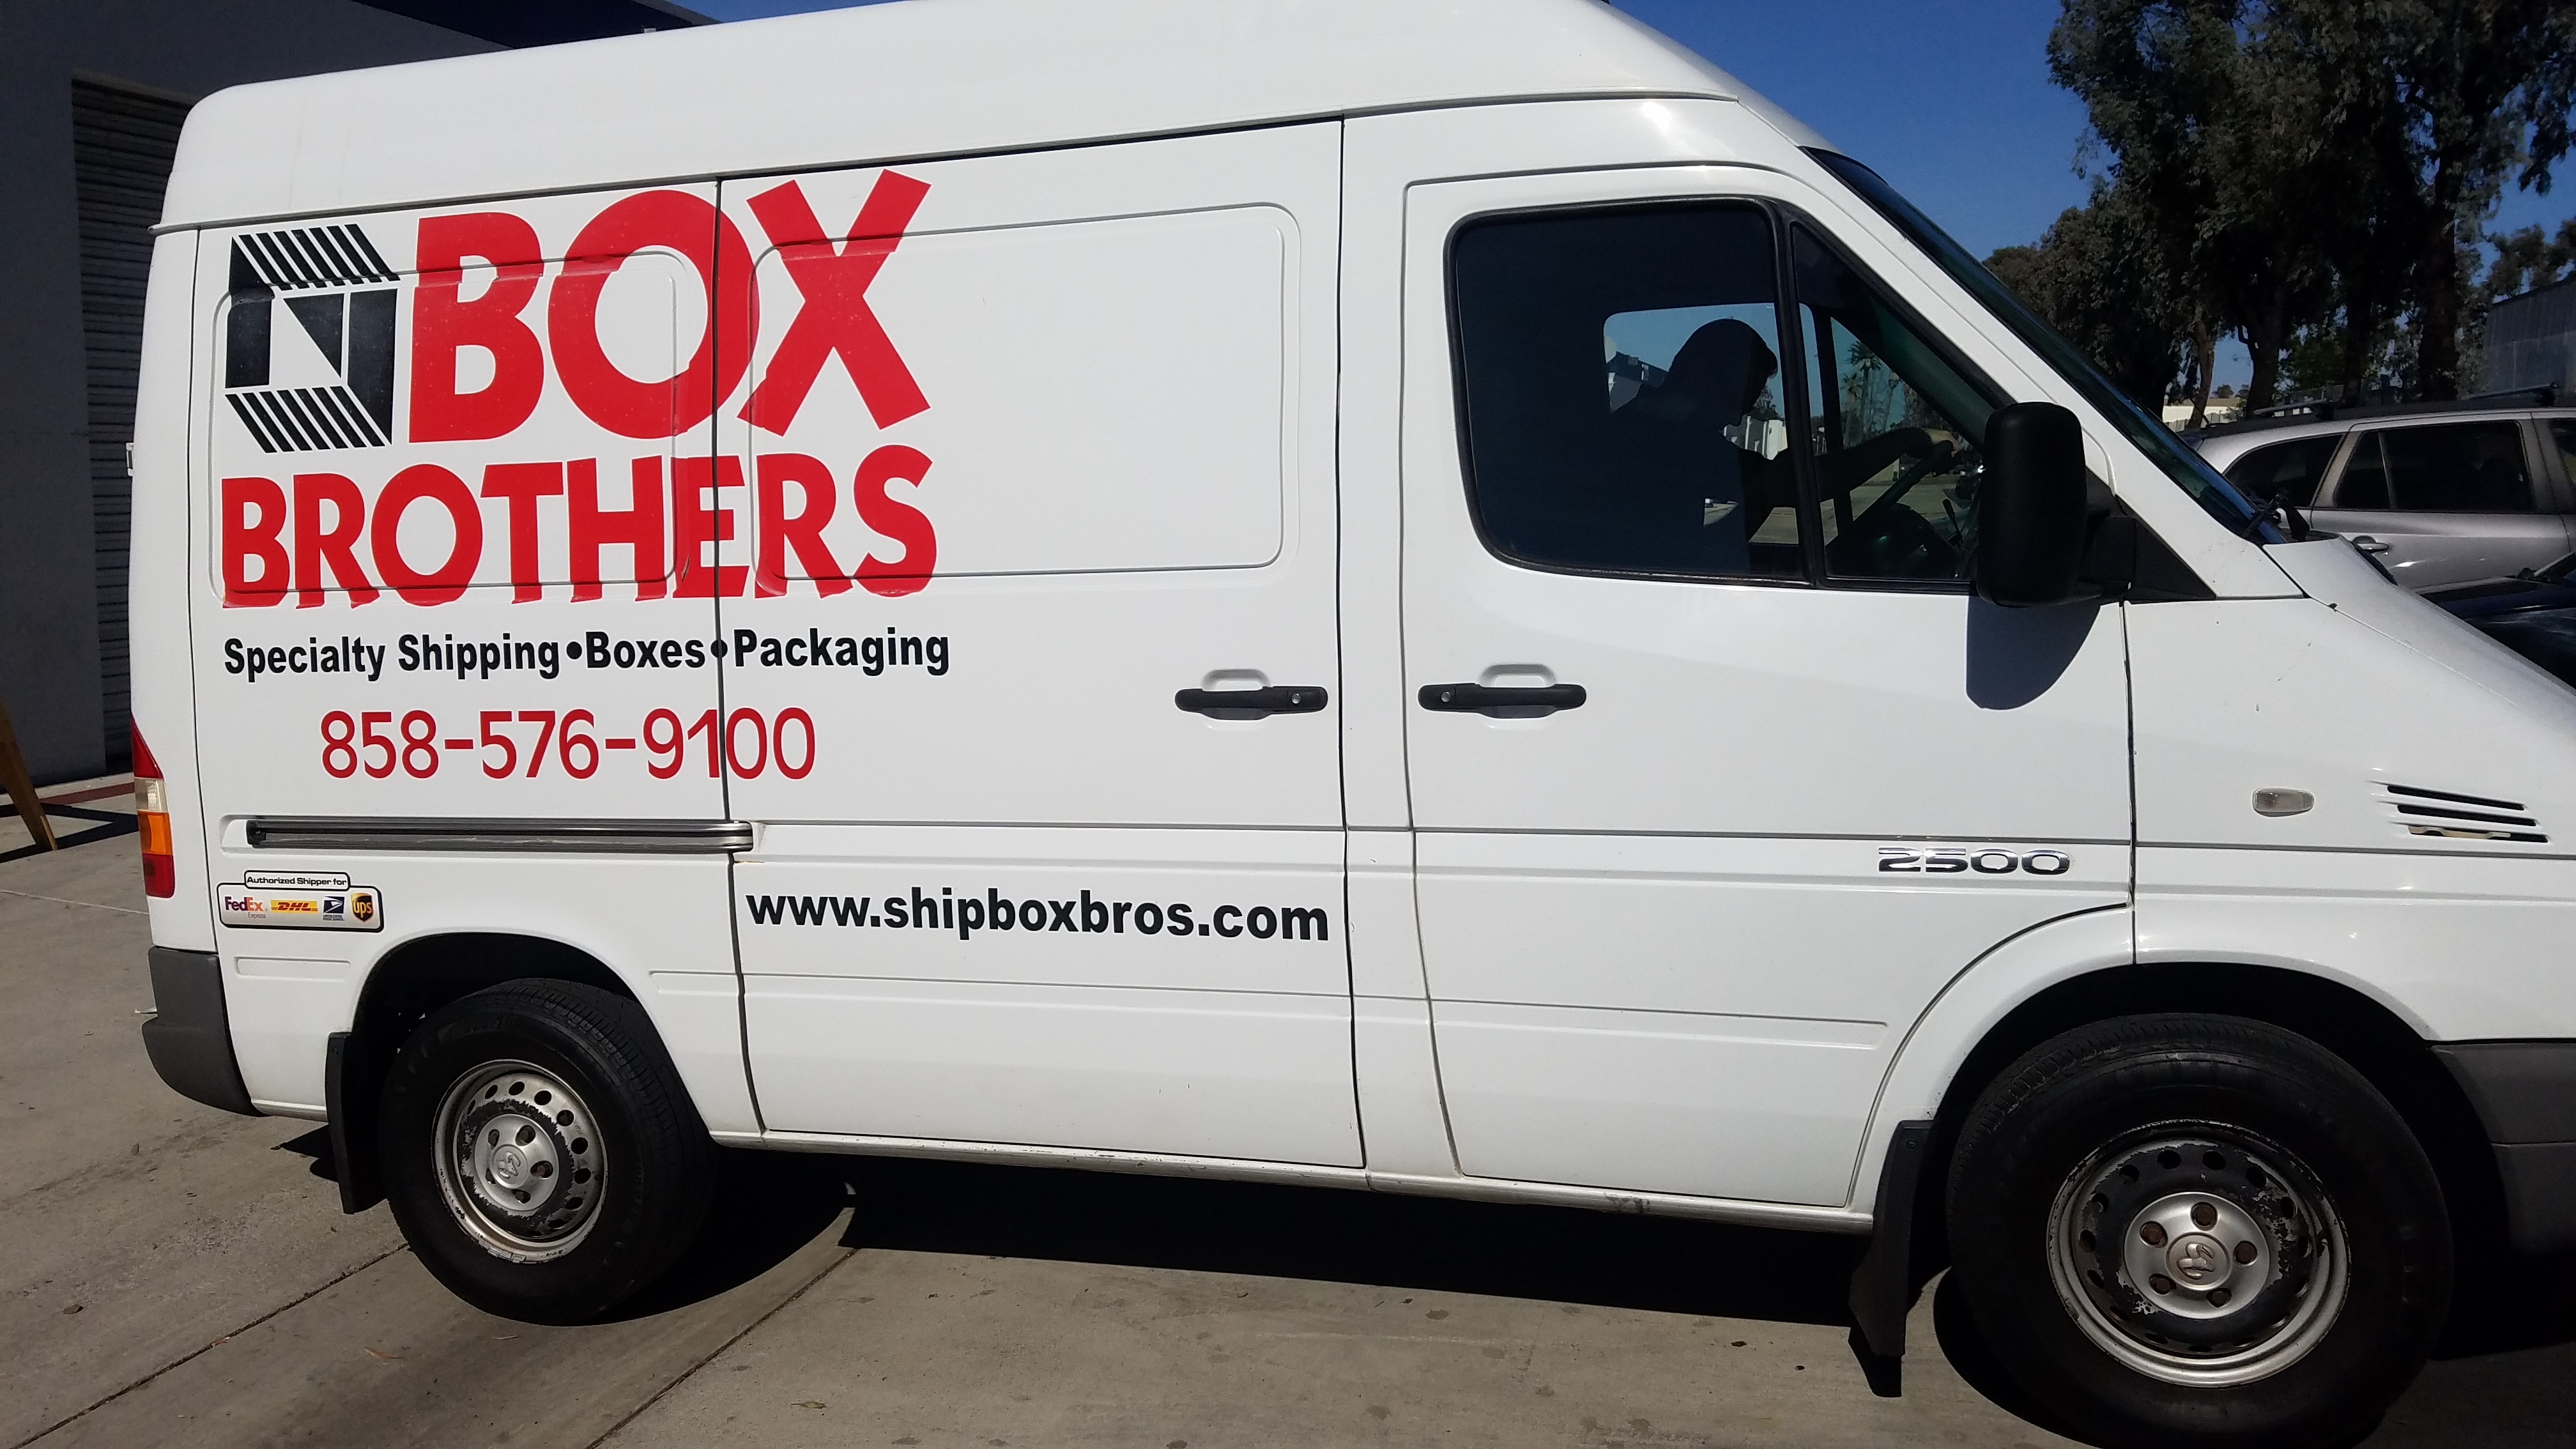 Box Brothers Packing and Shipping Service Photo